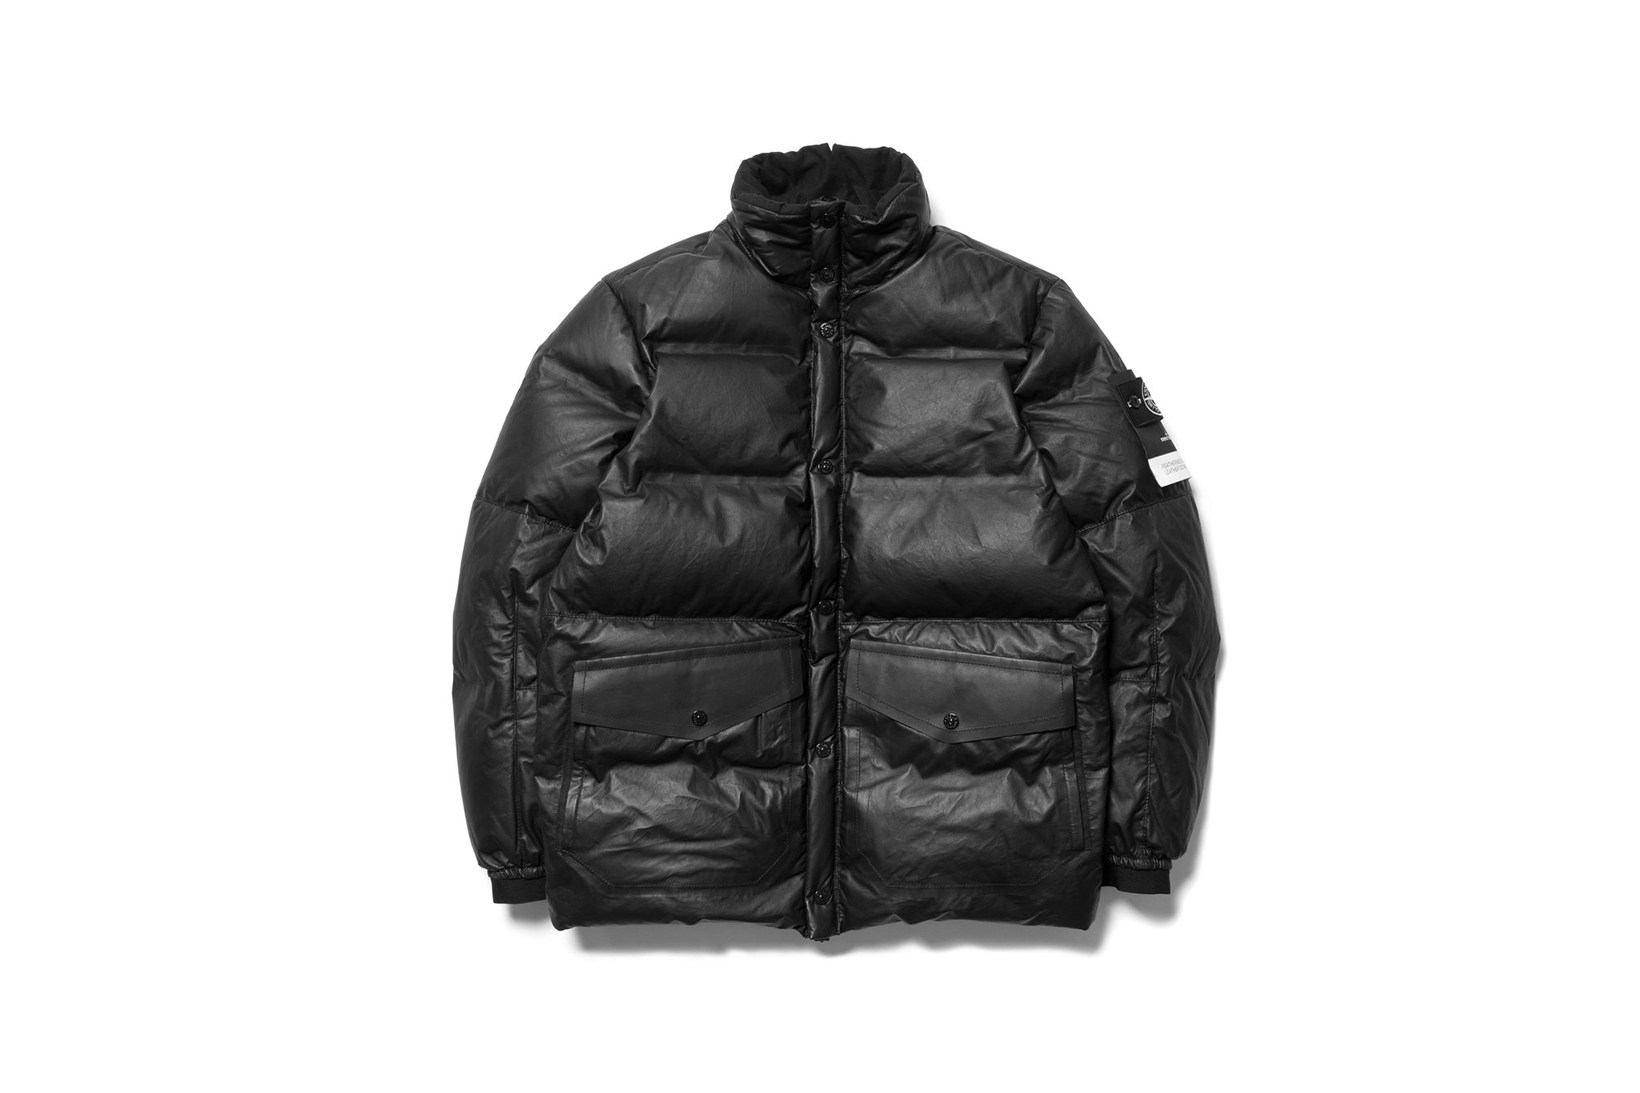 stone-island-shadow-project-2016-fall-winter-delivery-2